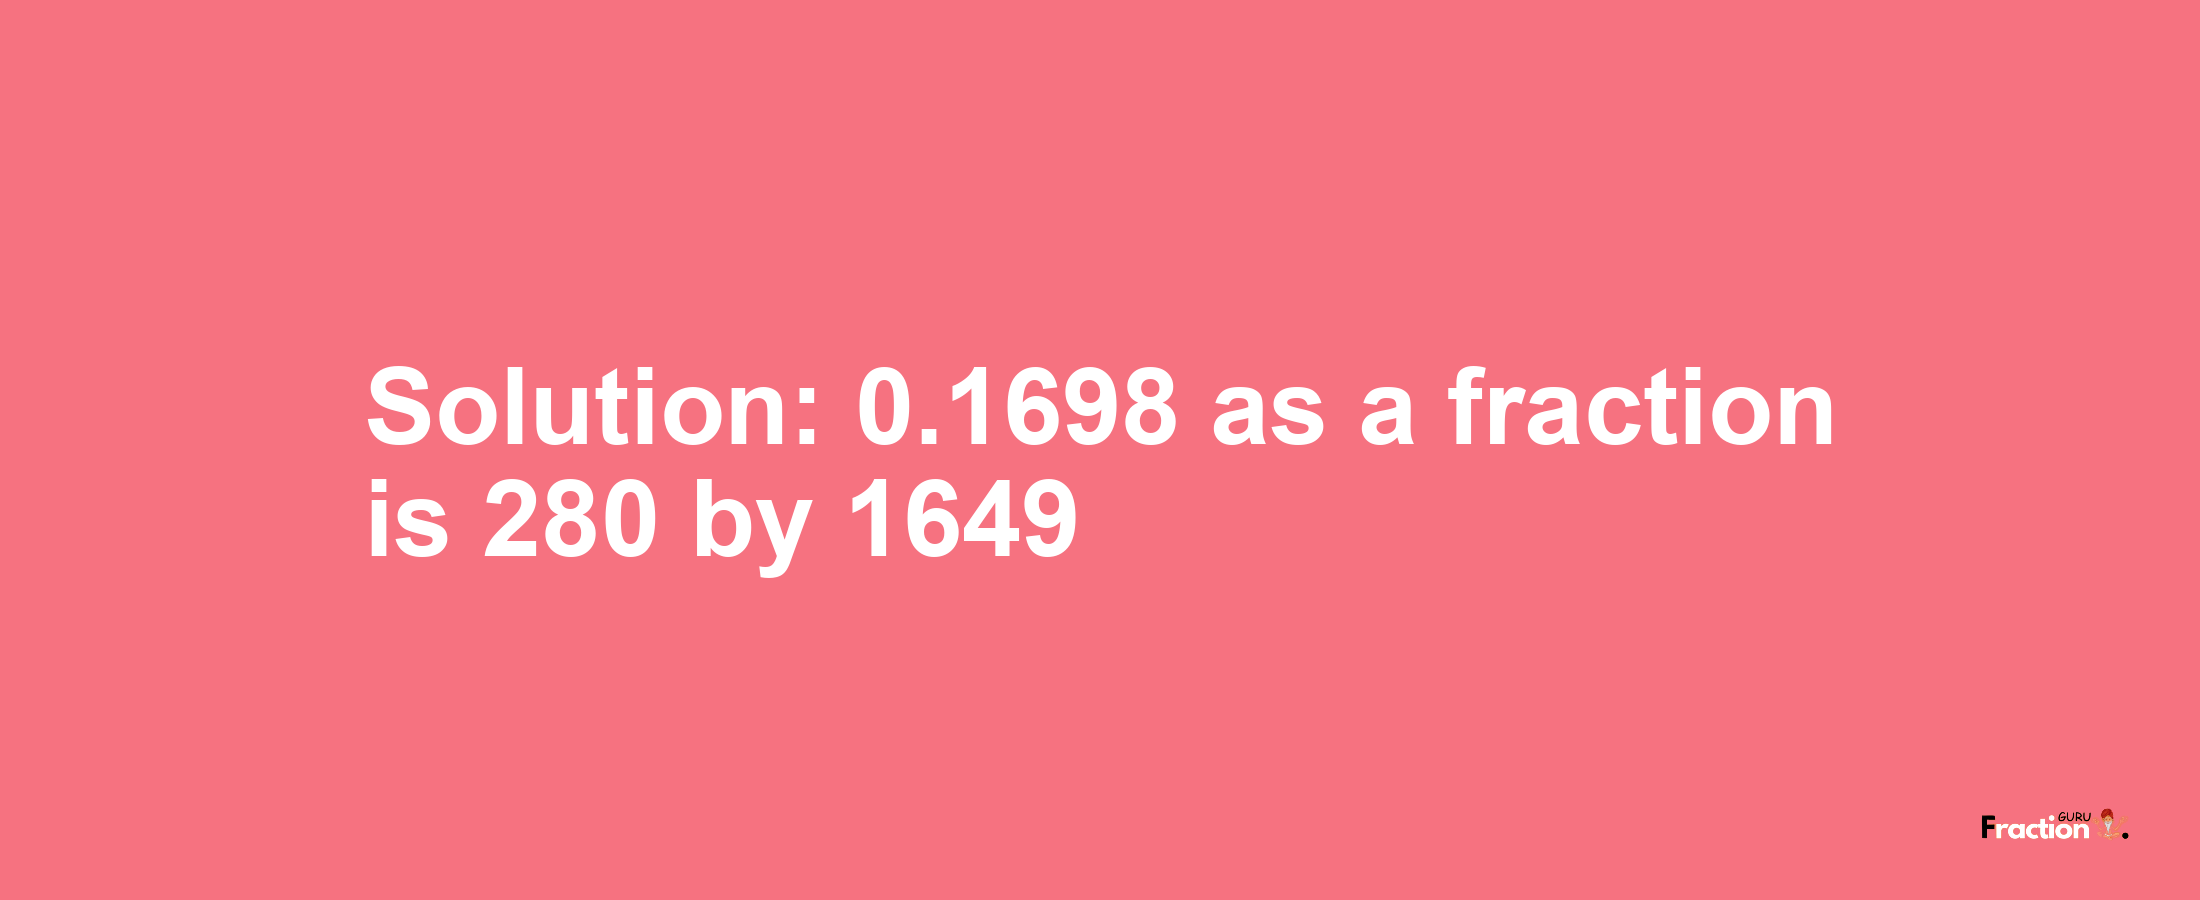 Solution:0.1698 as a fraction is 280/1649